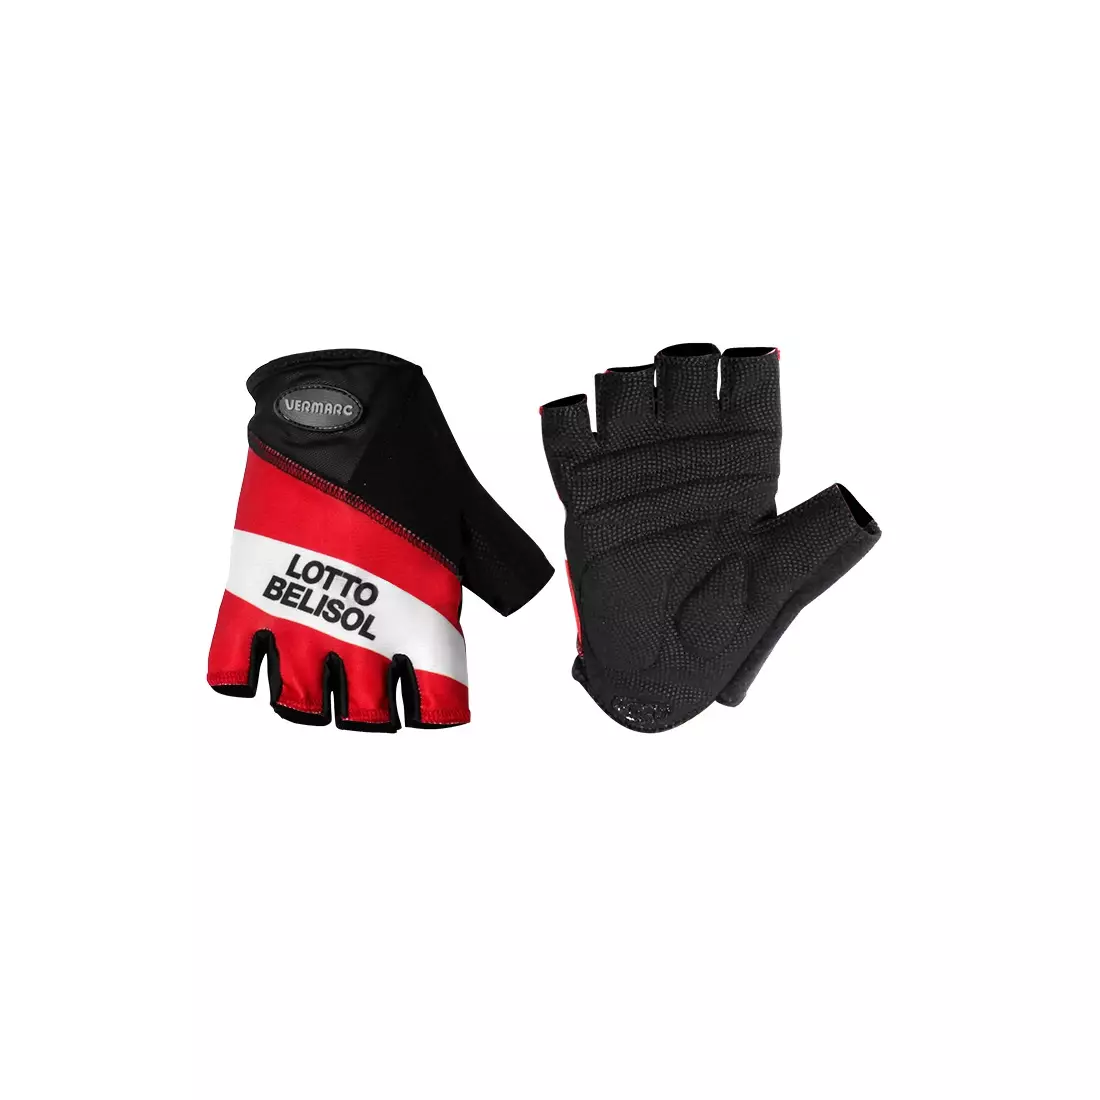 VERMARC - LOTTO BELISOL 2014 cycling gloves